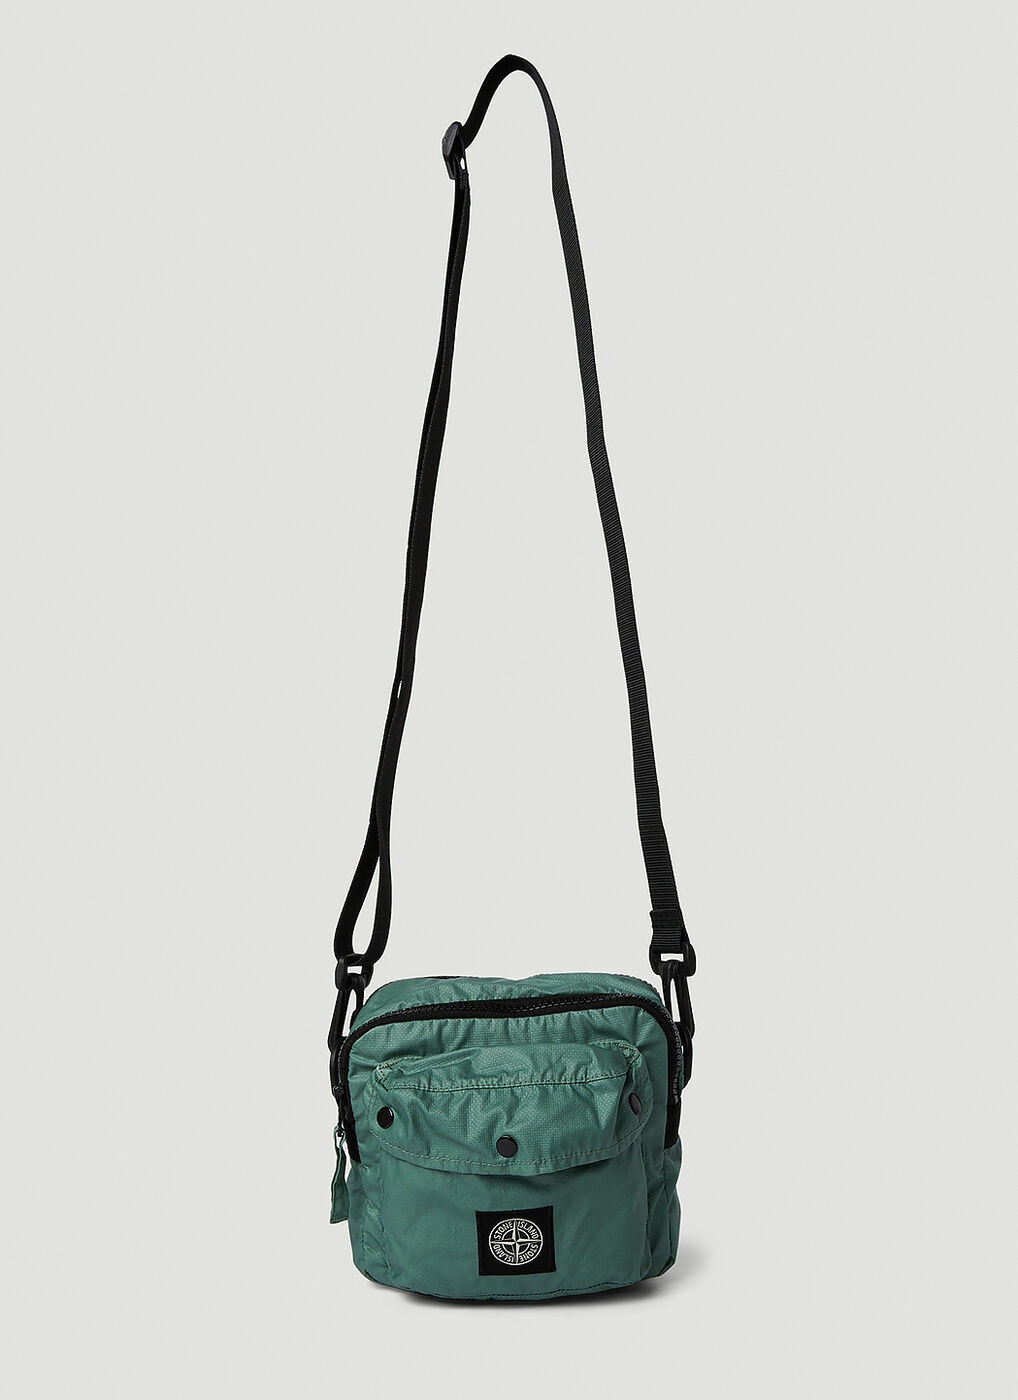 Convertible Pouch Bag in Green Stone Island